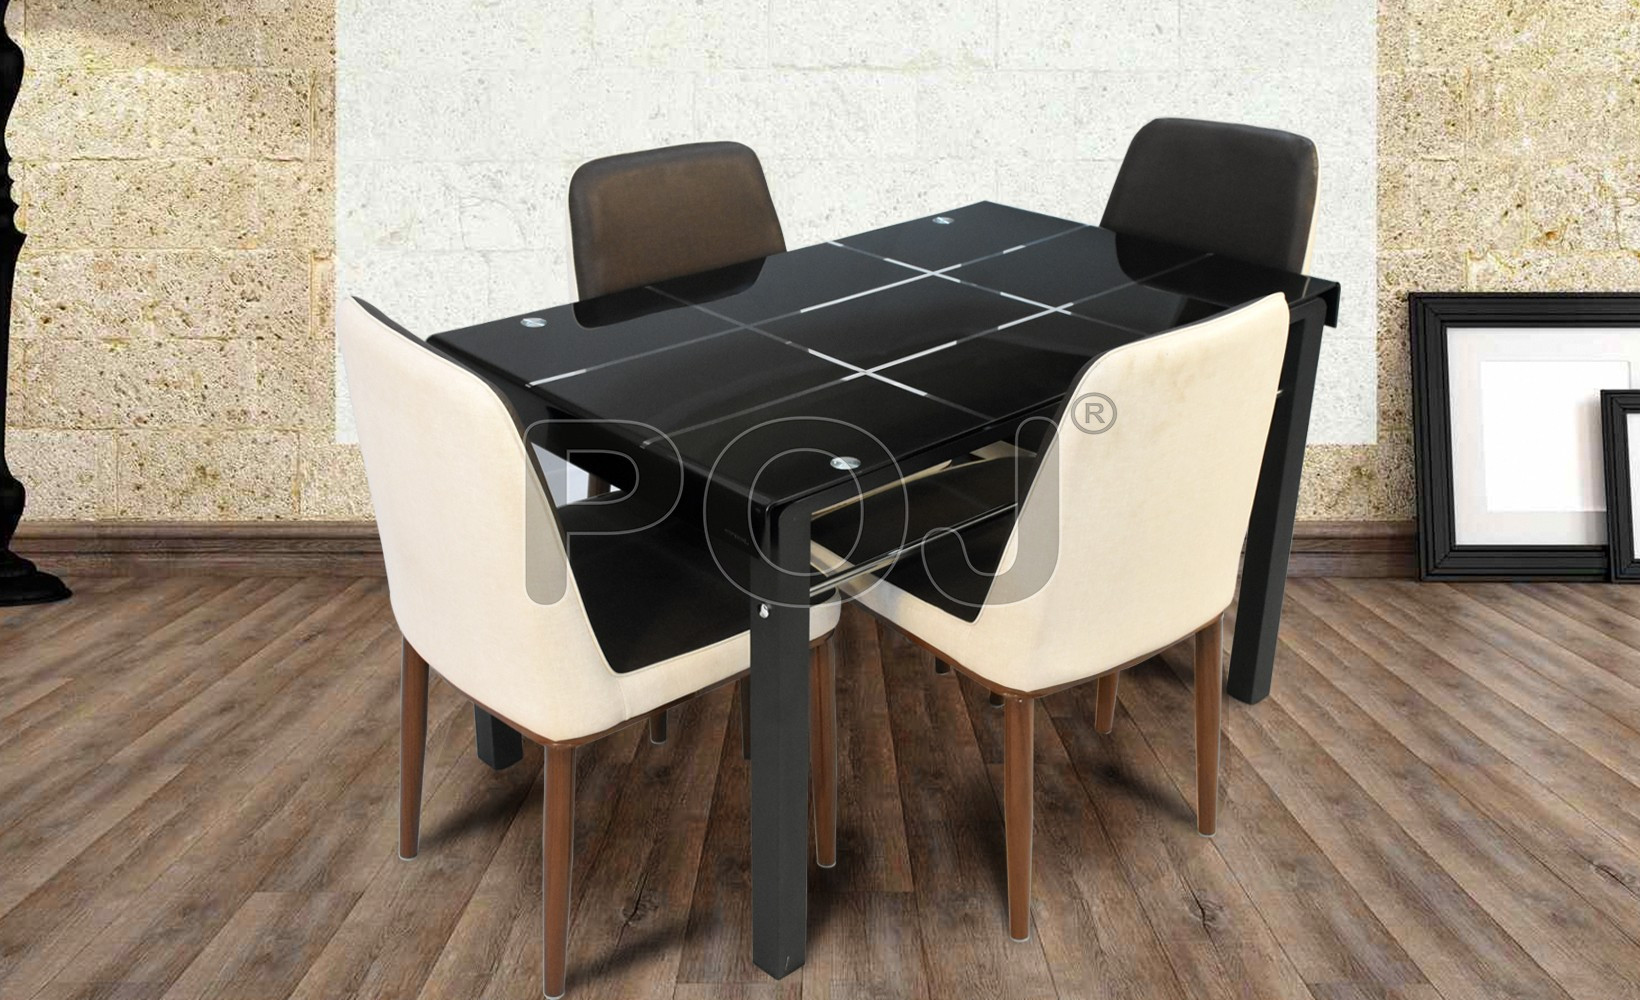 Bella 4 Seater Dining Table With Tempered Glass On Top